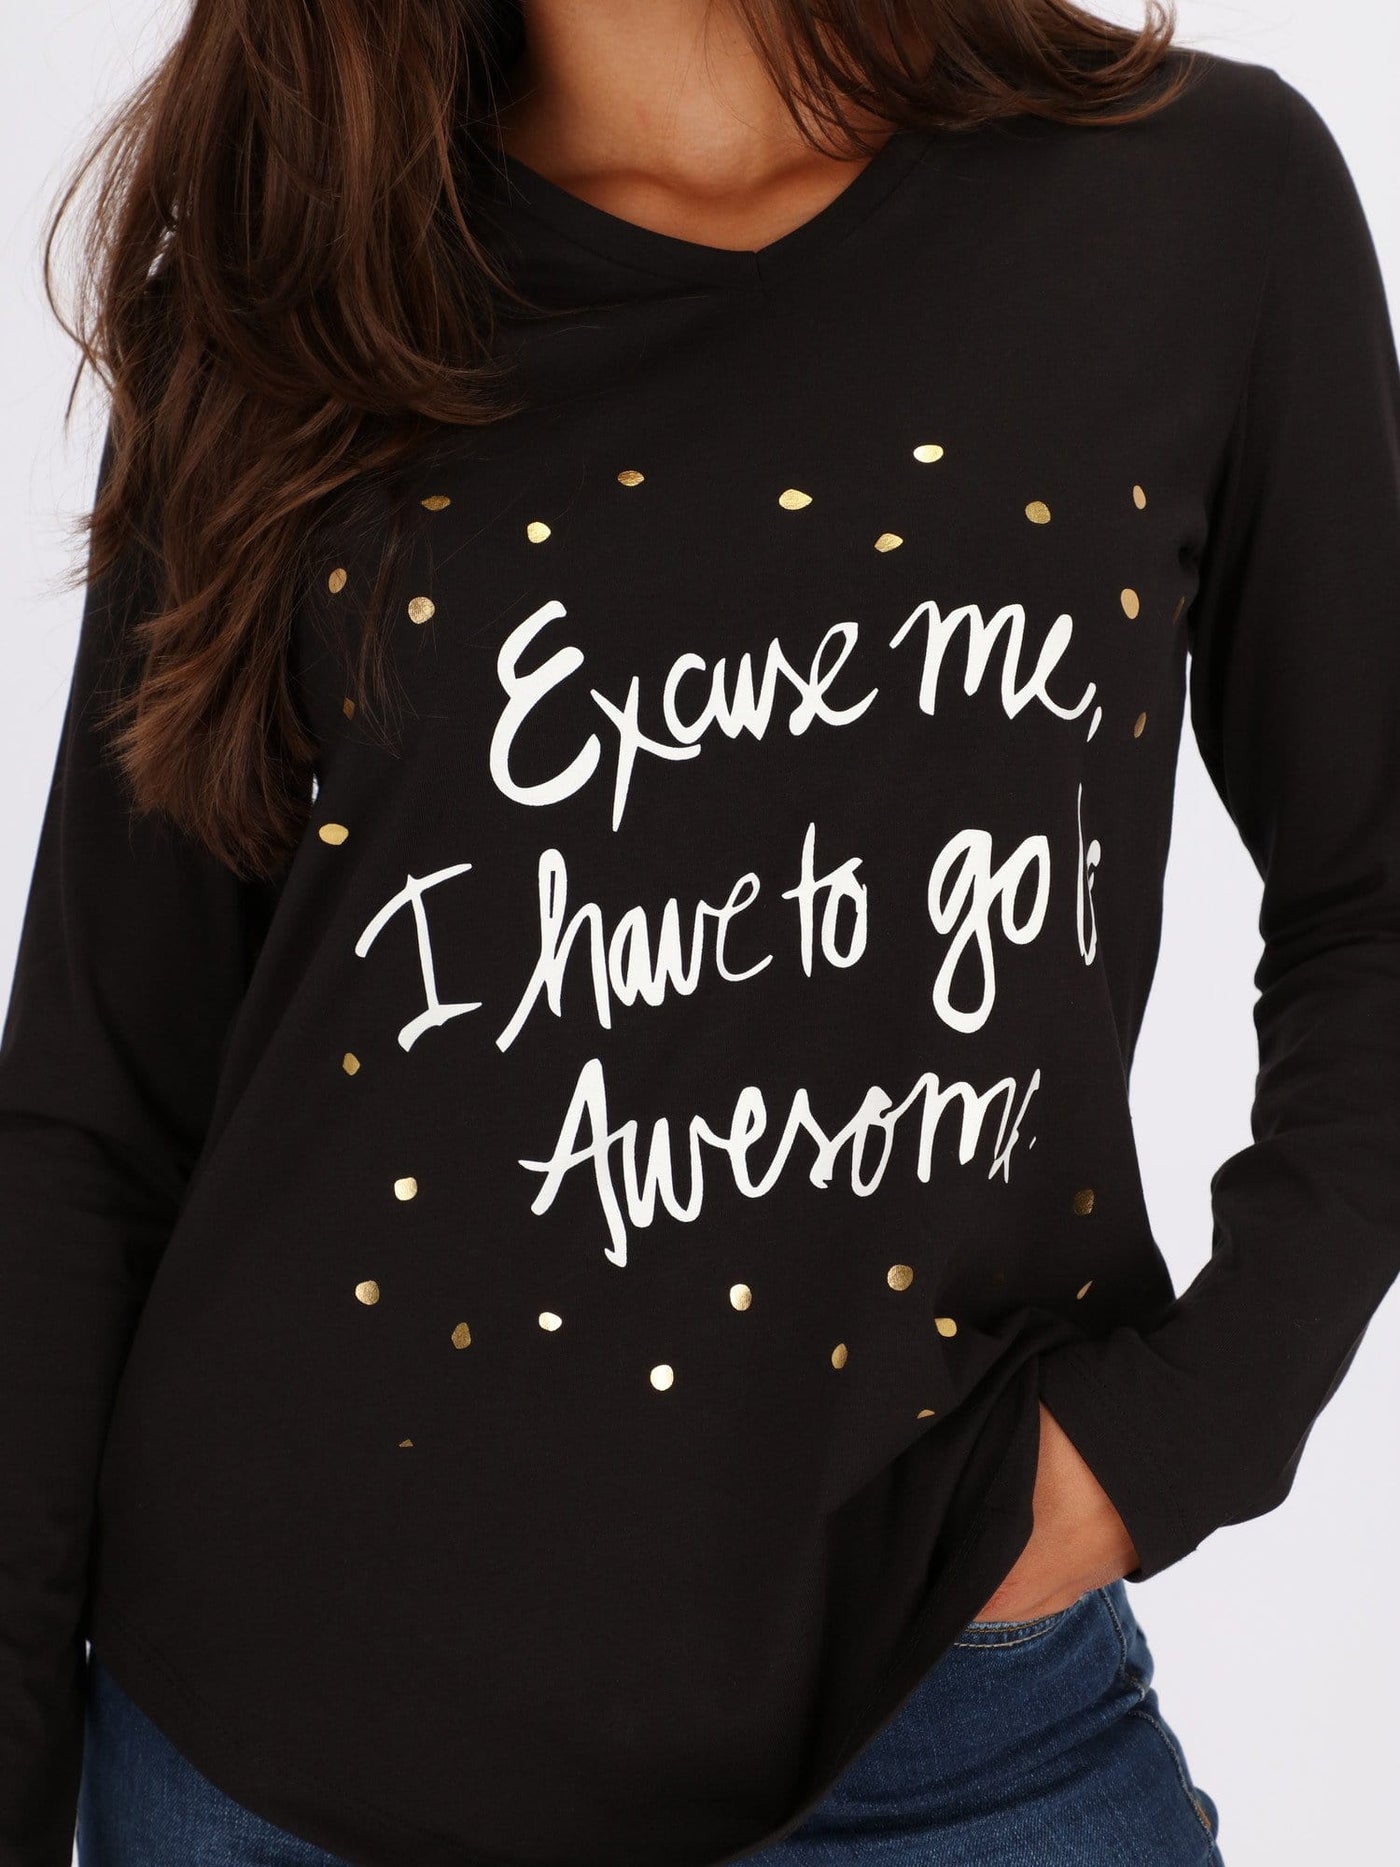 OR Tops & Blouses BLACK / L I have to Go Awesome Text Printed V-Neck T-shirt